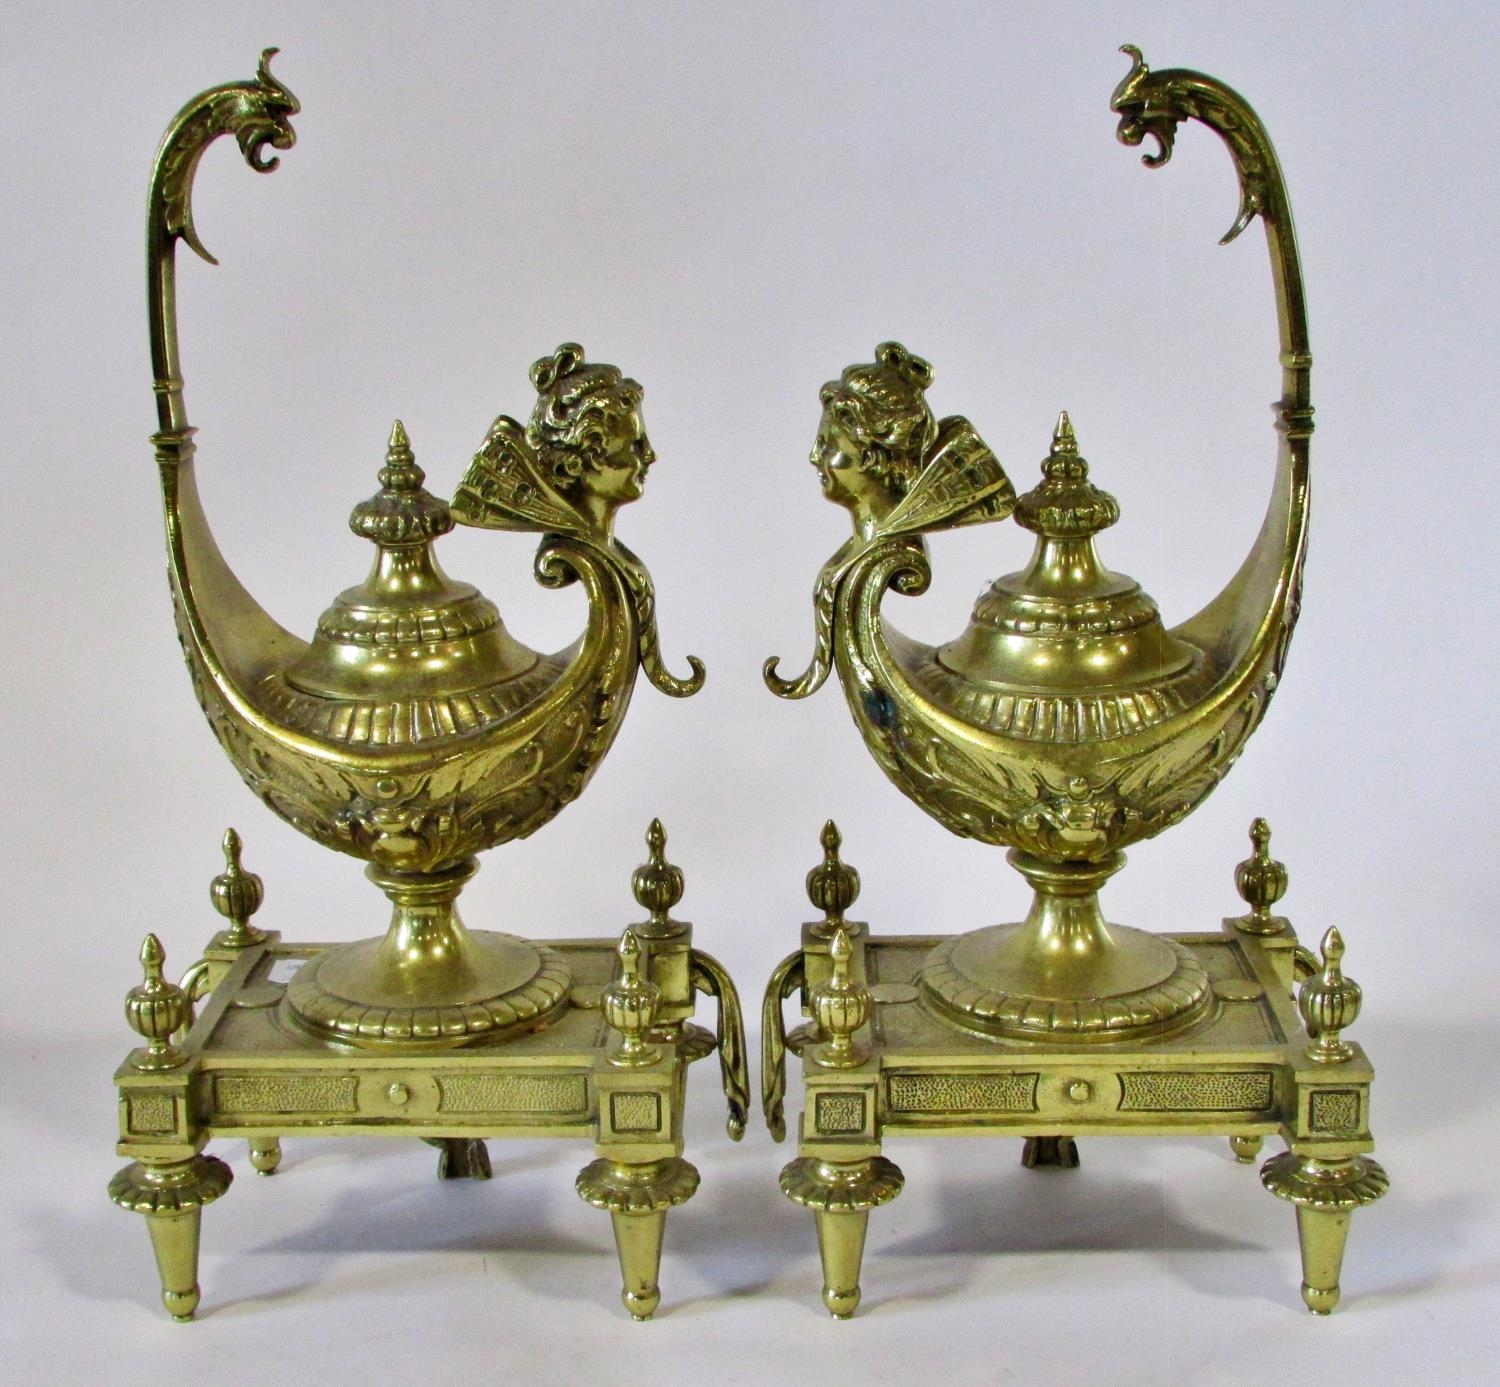 A large pair of 19th century brass dummy oil lamps (possibly ex-monumental fire side fender) in